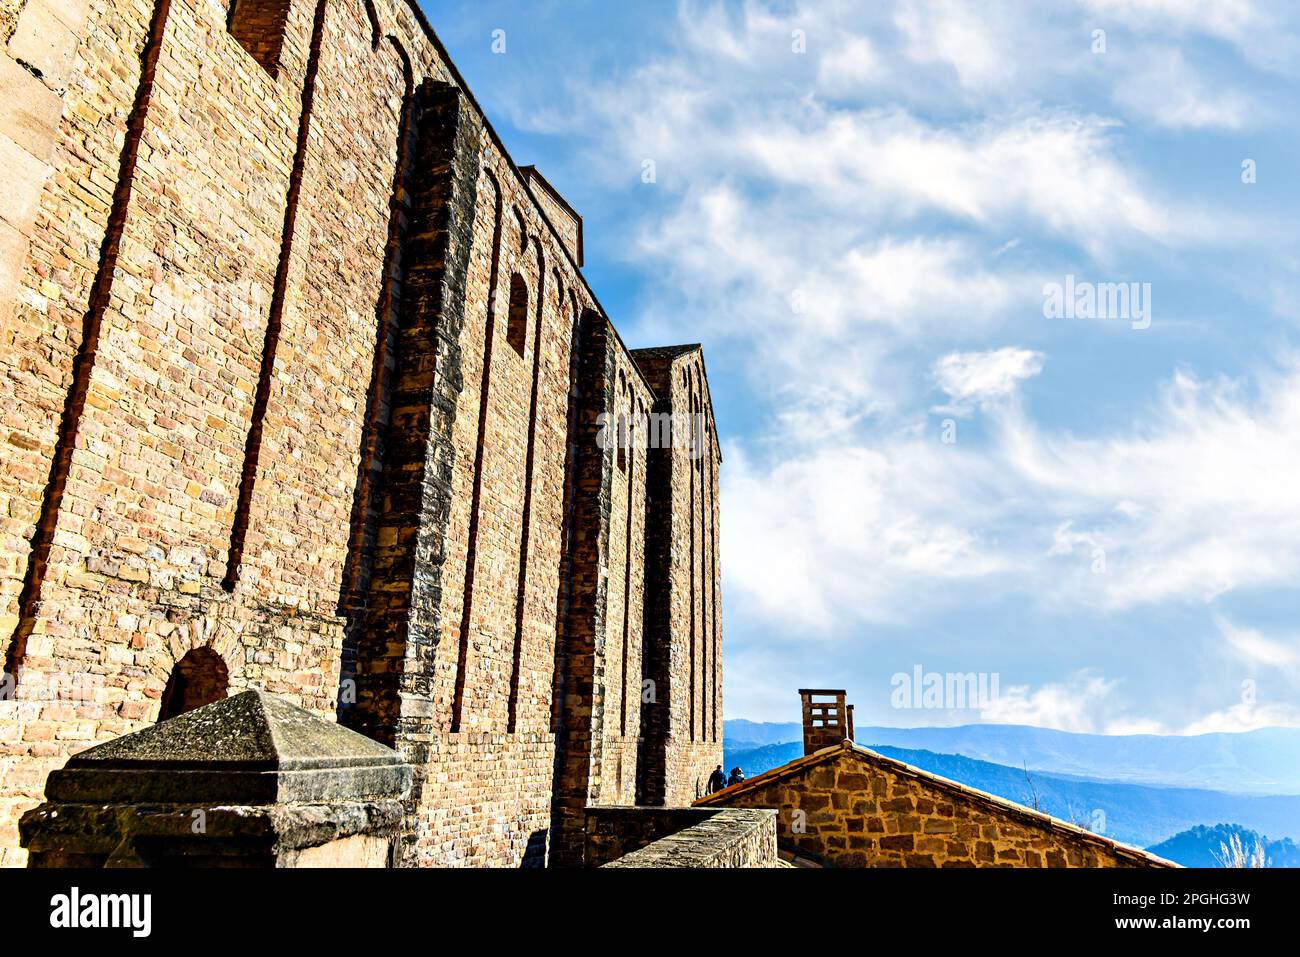 Images of areas of the medieval Castle of Cardona, Barcelona, Spain Stock Photo